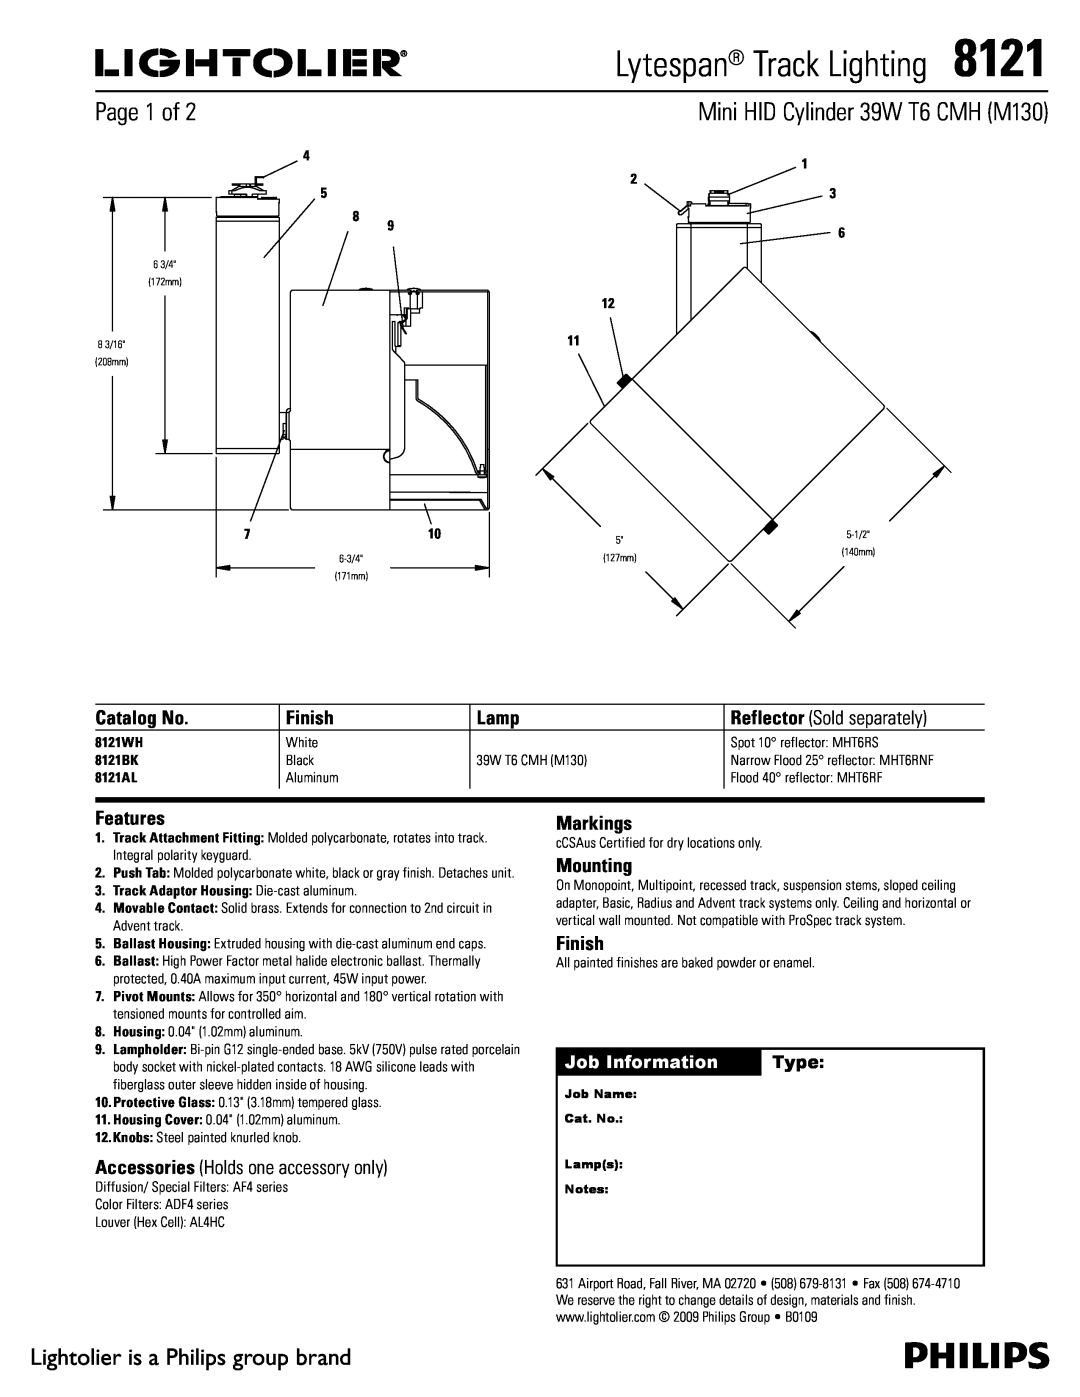 Lightolier 8121 manual Page 1 of, Mini HID Cylinder 39W T6 CMH M130, Lightolier is a Philips group brand, Job Information 